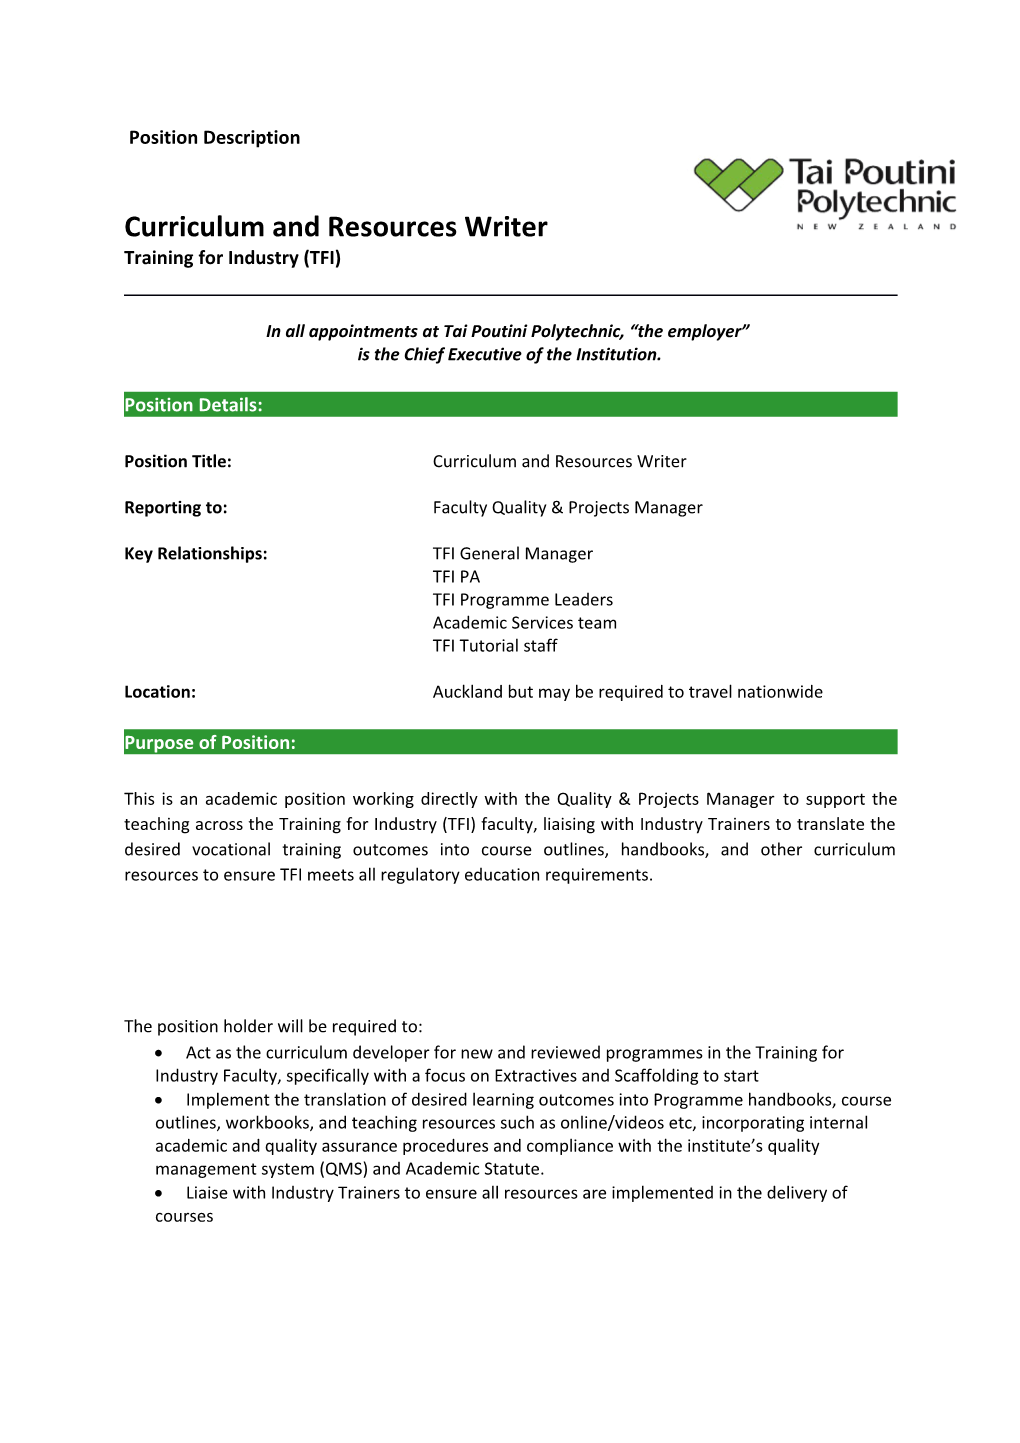 Curriculum and Resources Writer